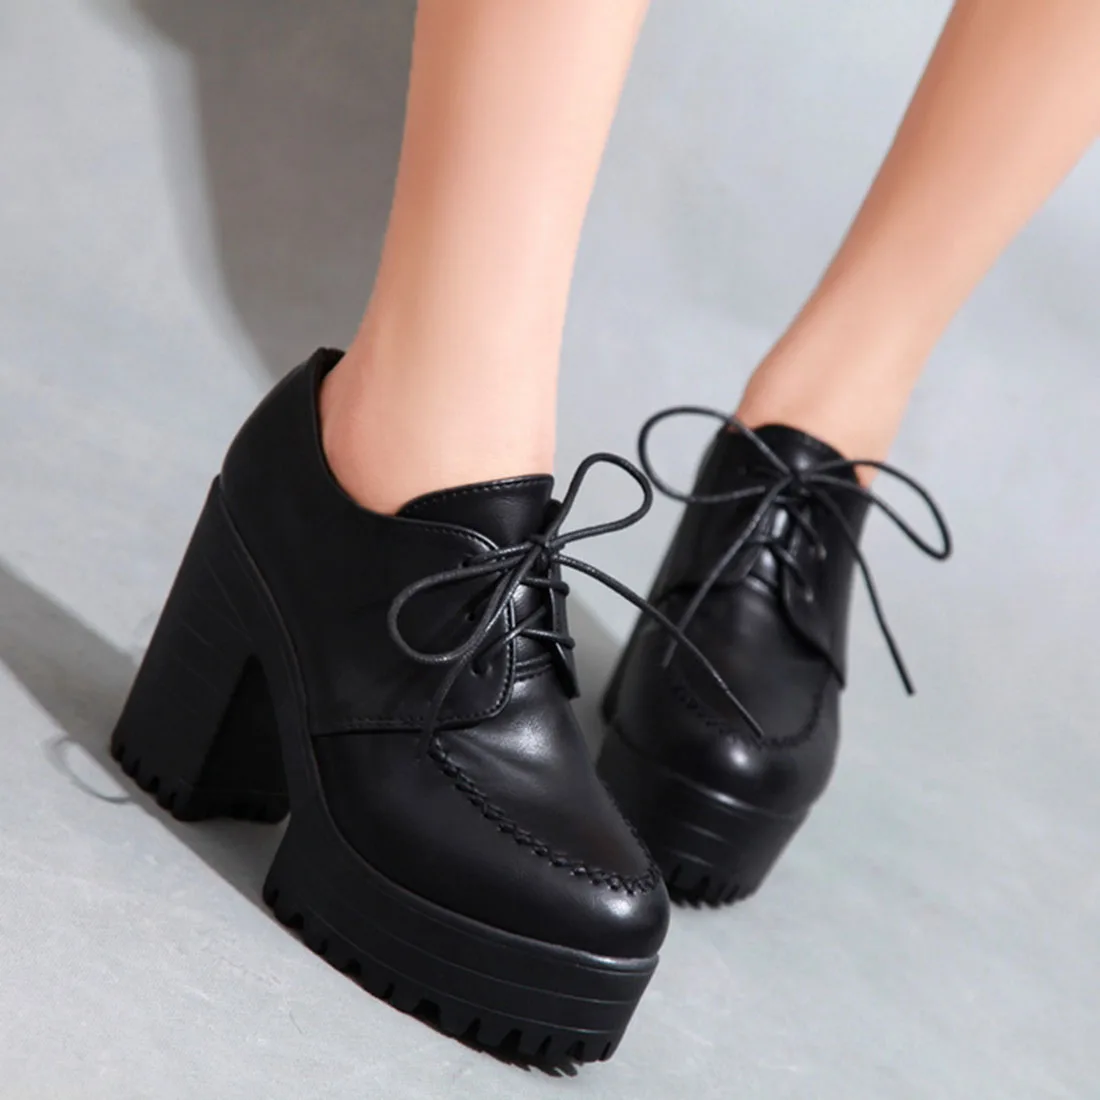 Women England high heel ankle boots vintage Low Top Platform Wedge shoes ladies genuine leather shoes black Sexy chaussure femme